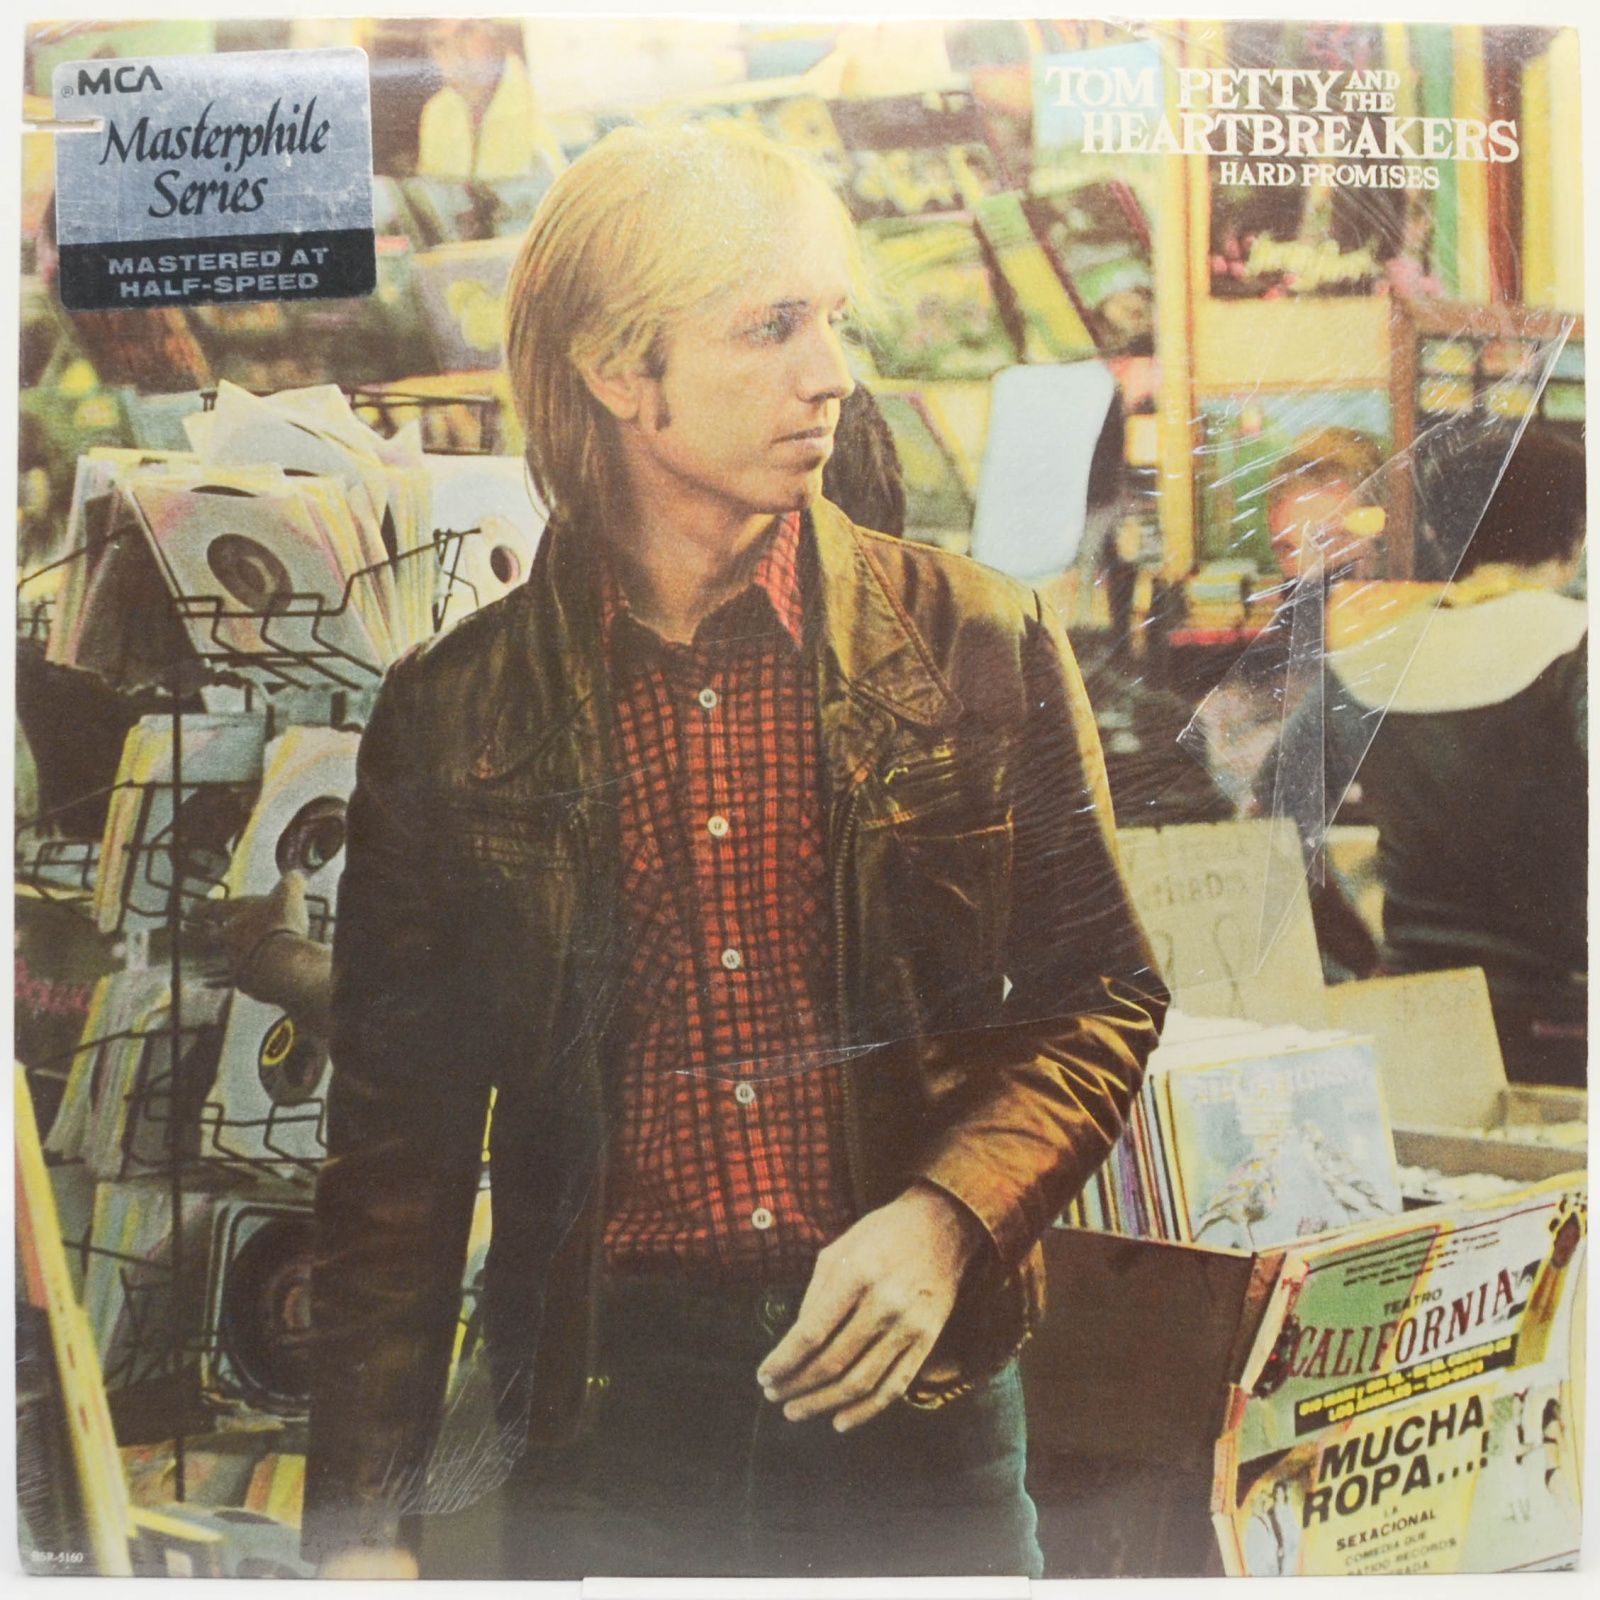 Tom Petty And The Heartbreakers — Hard Promises, 1981